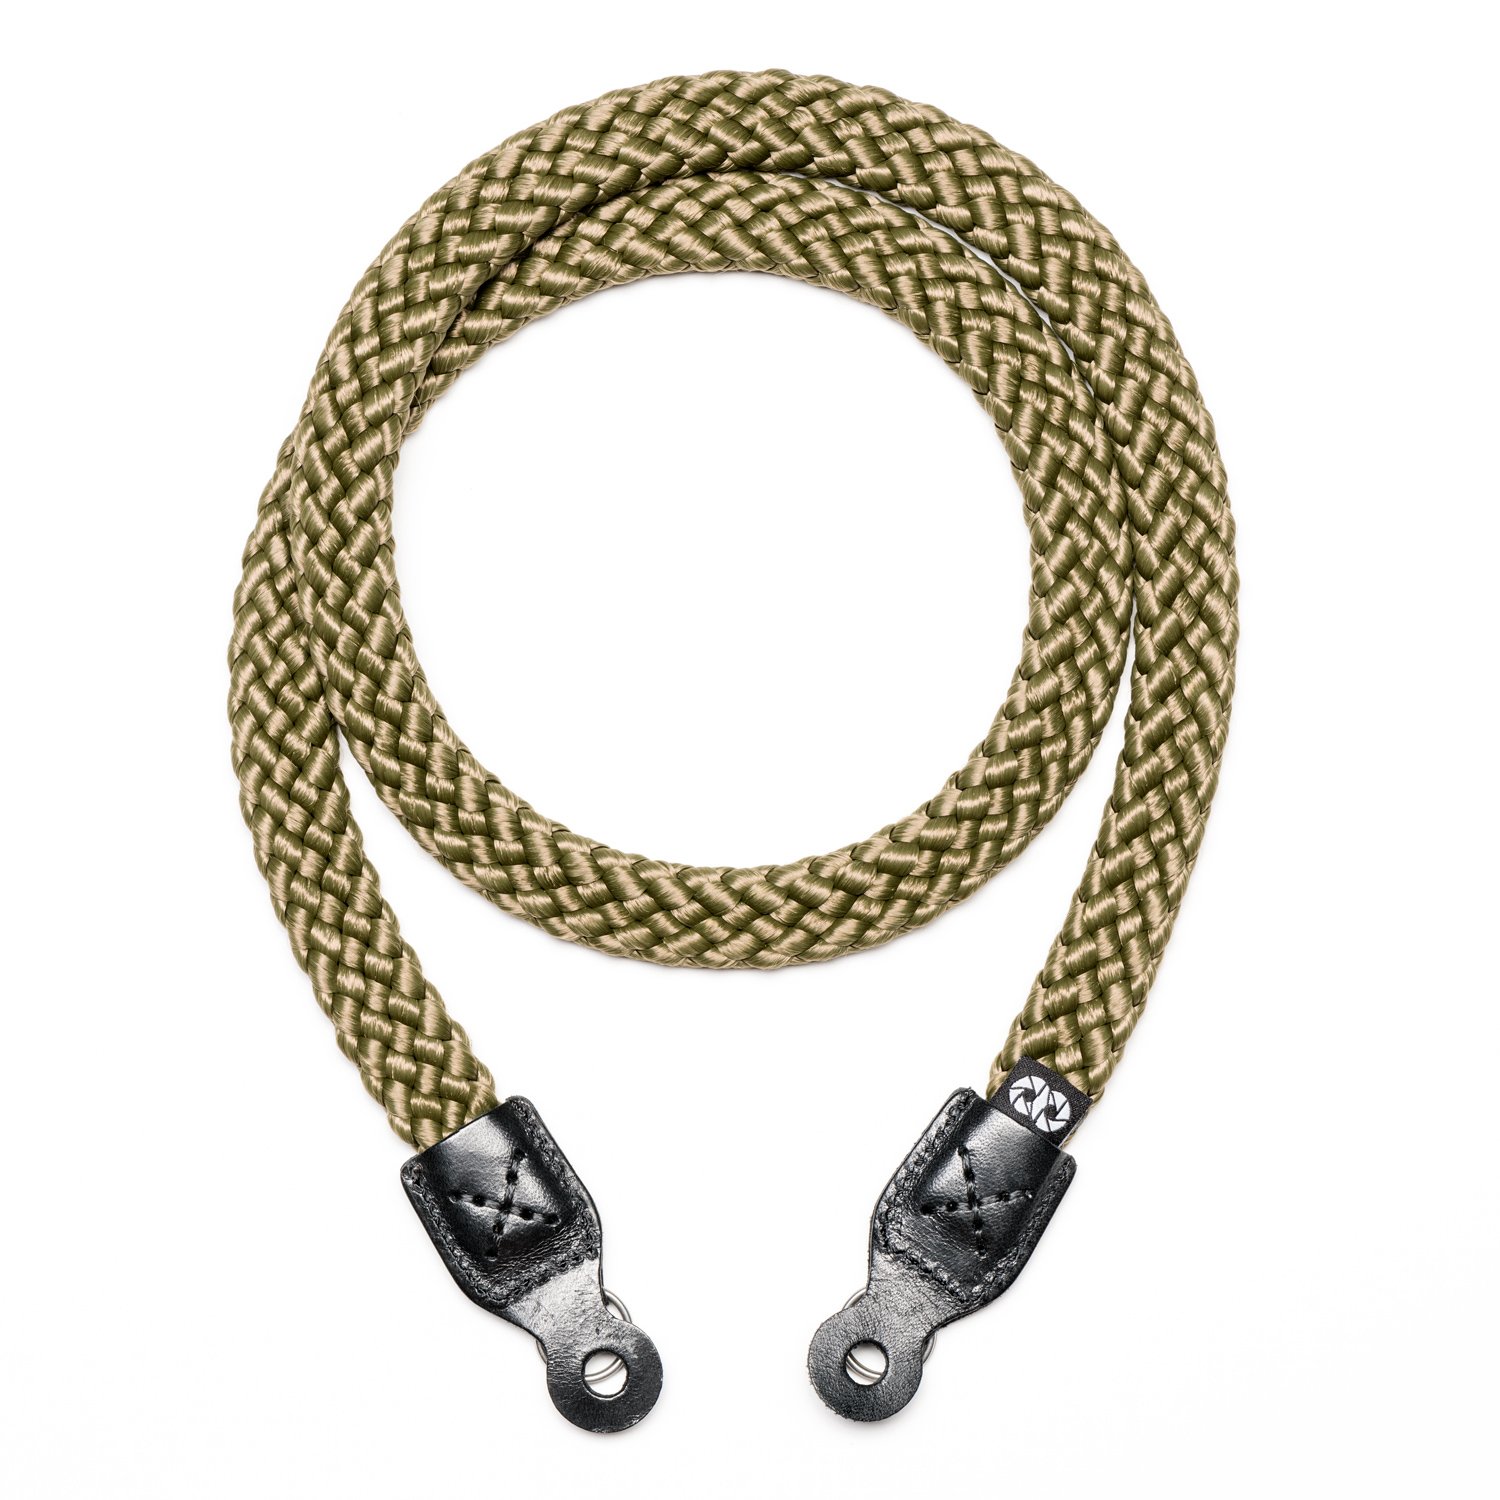 TThumbnail image for COOPH BRAID CAMERA STRAP - MILITARY GREEN